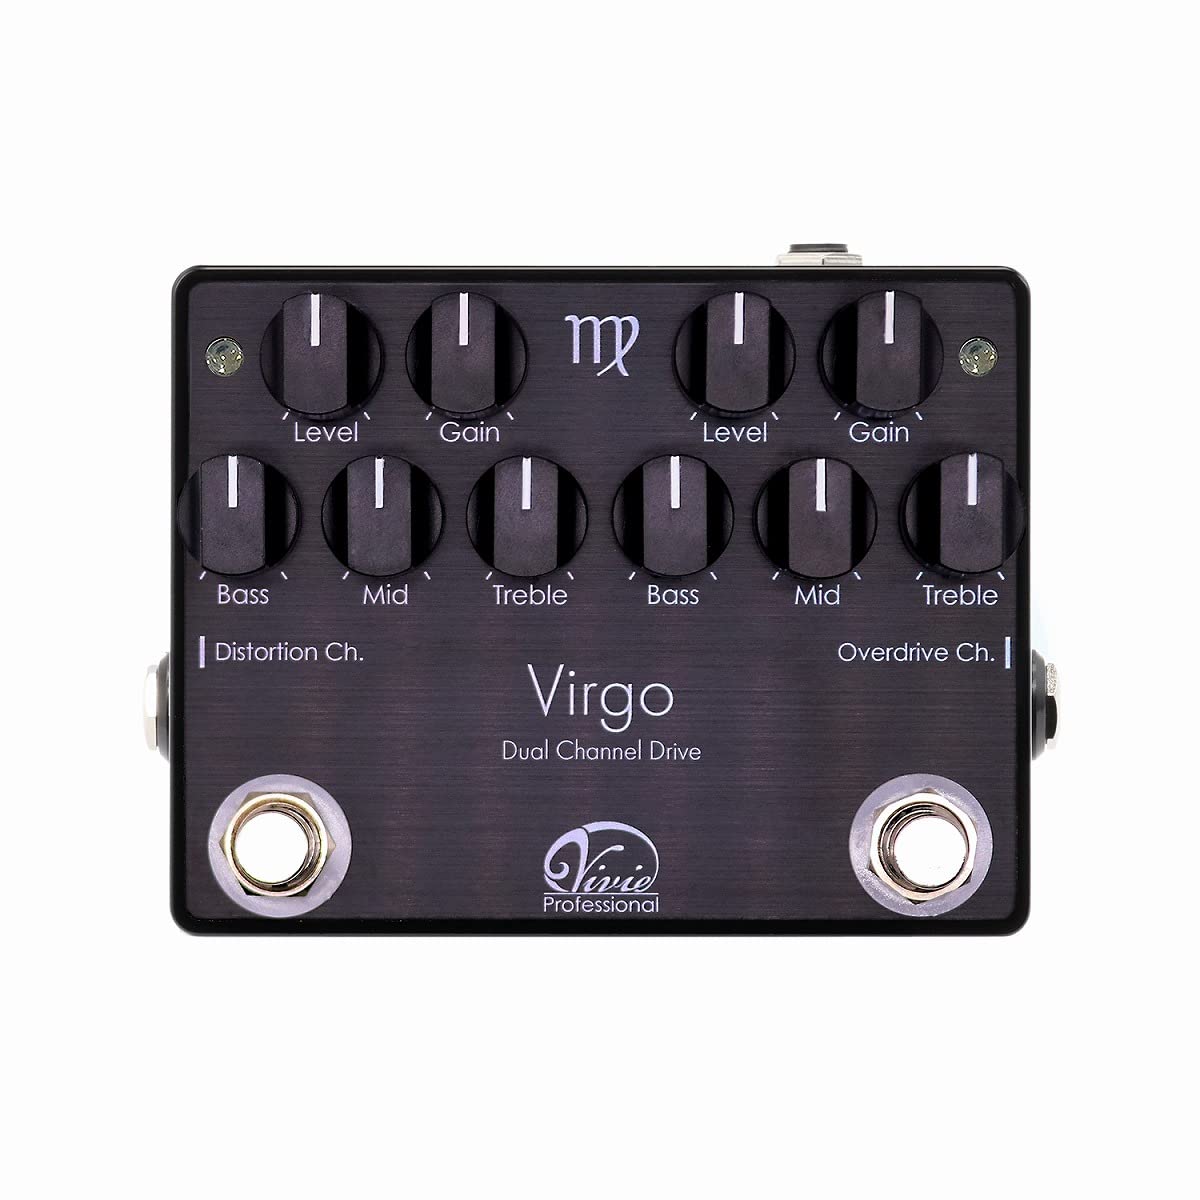 Vivie Virgo Overdrive distortion Dual Channel Drive Effects Pedal